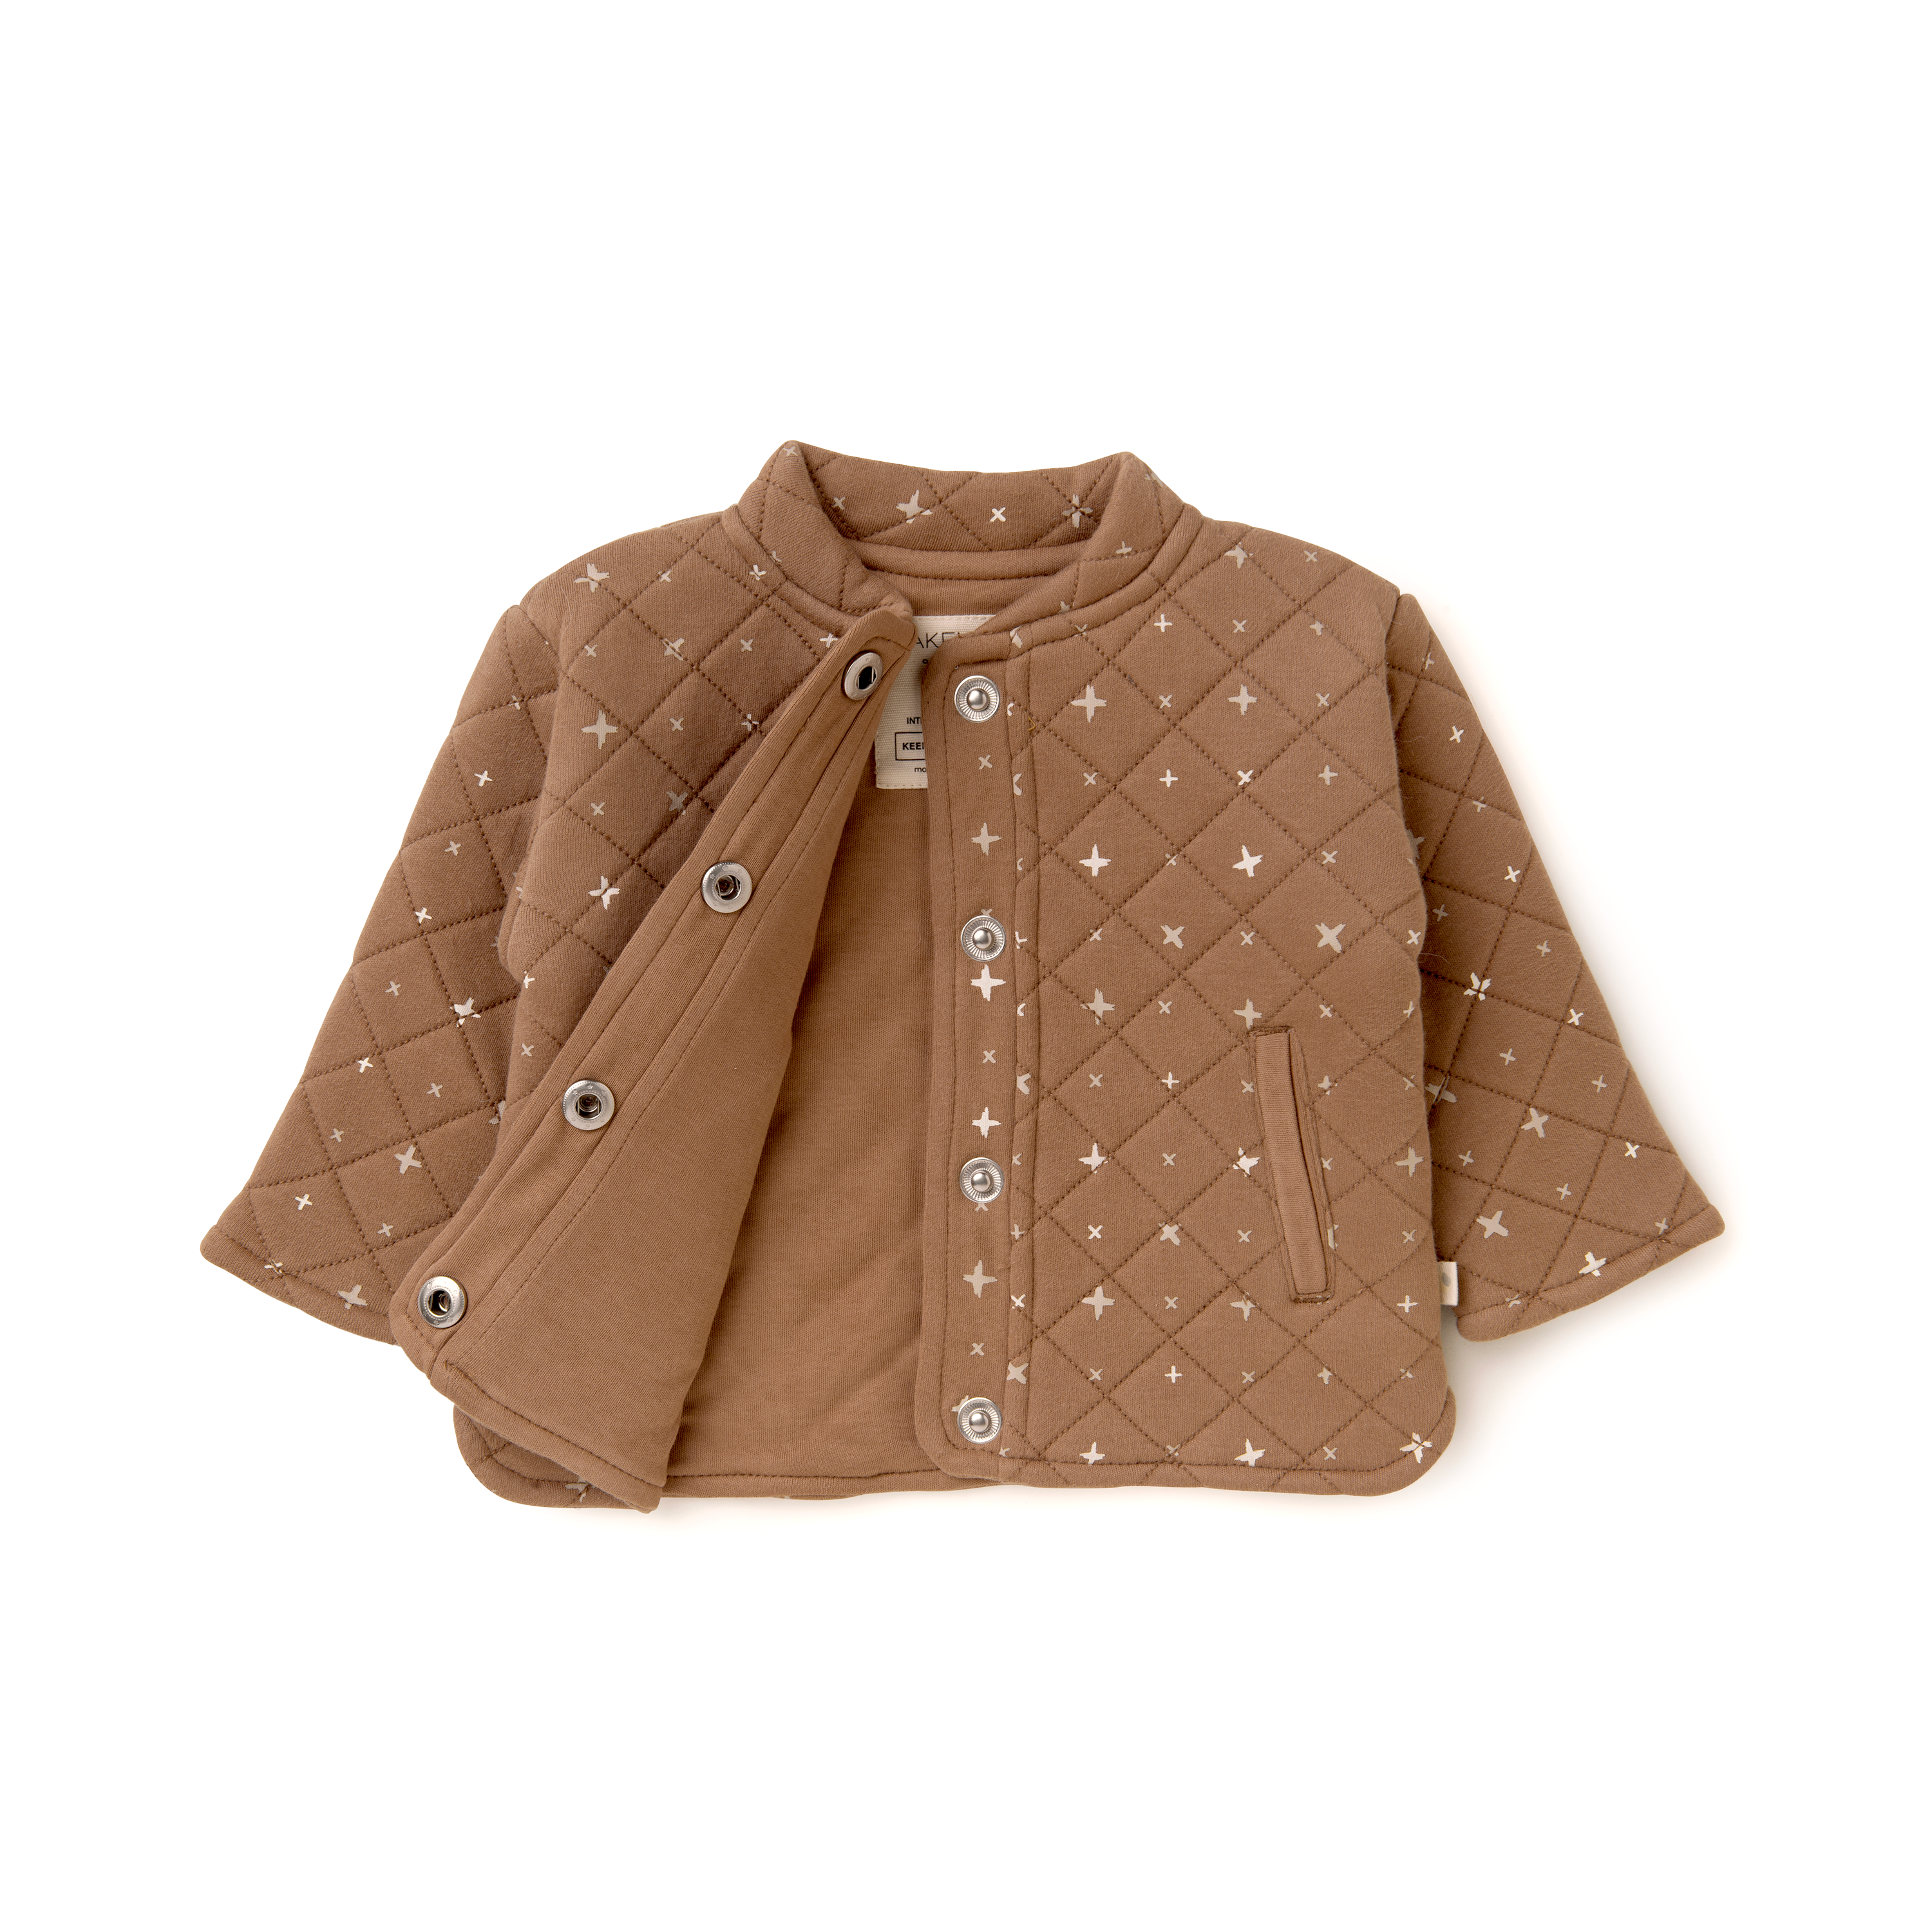 A beige Organic Merino Wool Buttoned Jacket - Sparkle from Organic Kids with a quilted design and snap buttons, displayed flat on a white background.